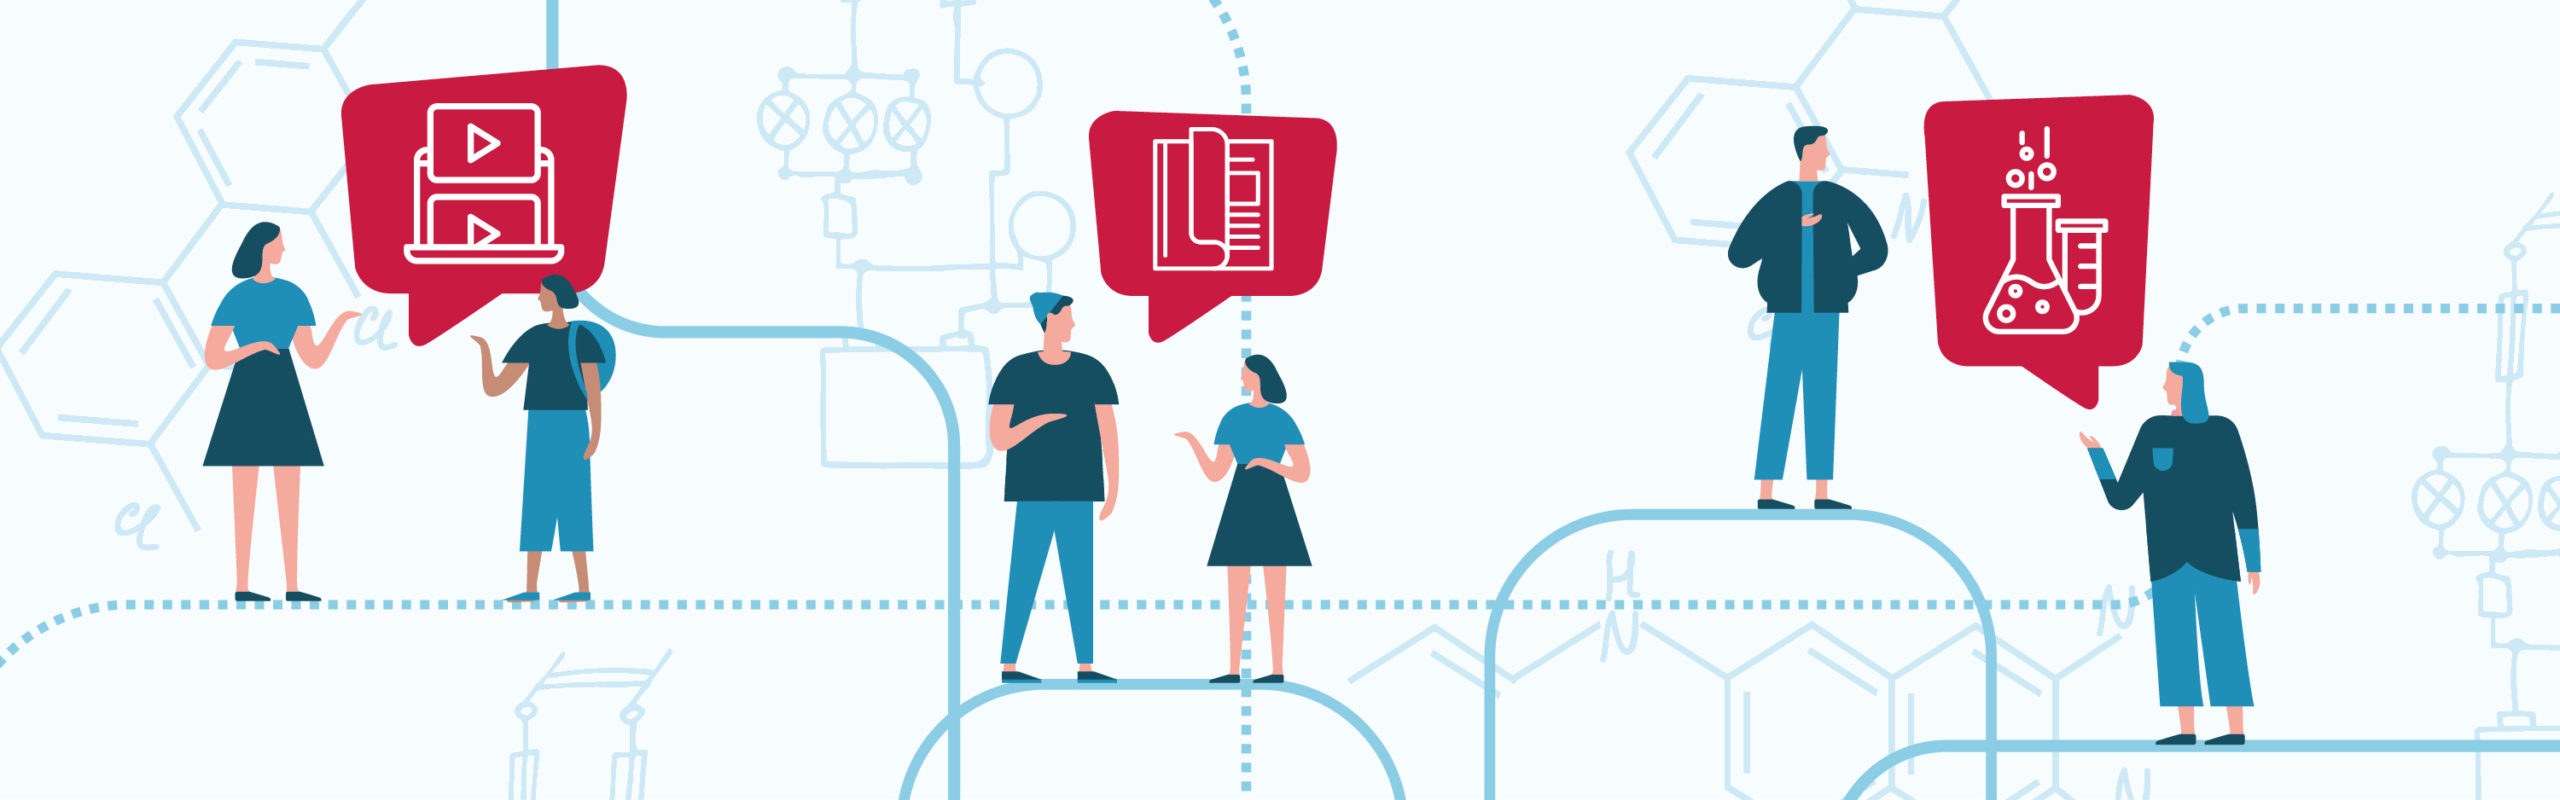 Image Description: Article banner. A simple drawing of six people talking in groups of two, speech bubbles between them indicating they're discussing scientific subjects. End Description